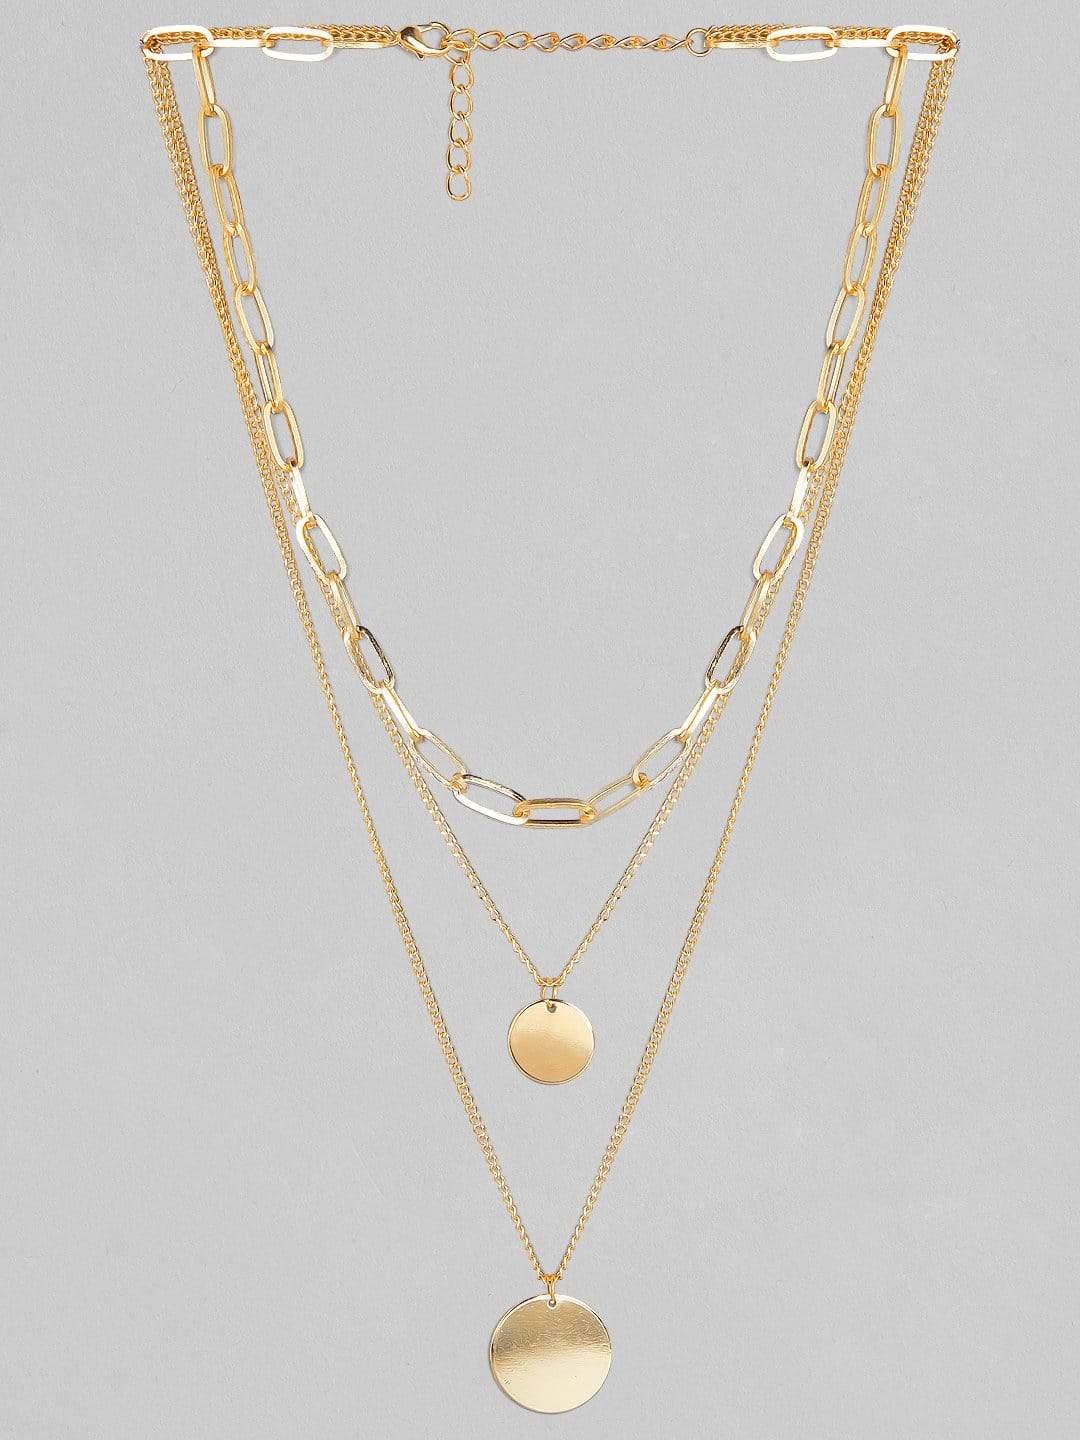 set of 2 necklaces gold plated layered and round pendant gold plated interlink chain necklaces